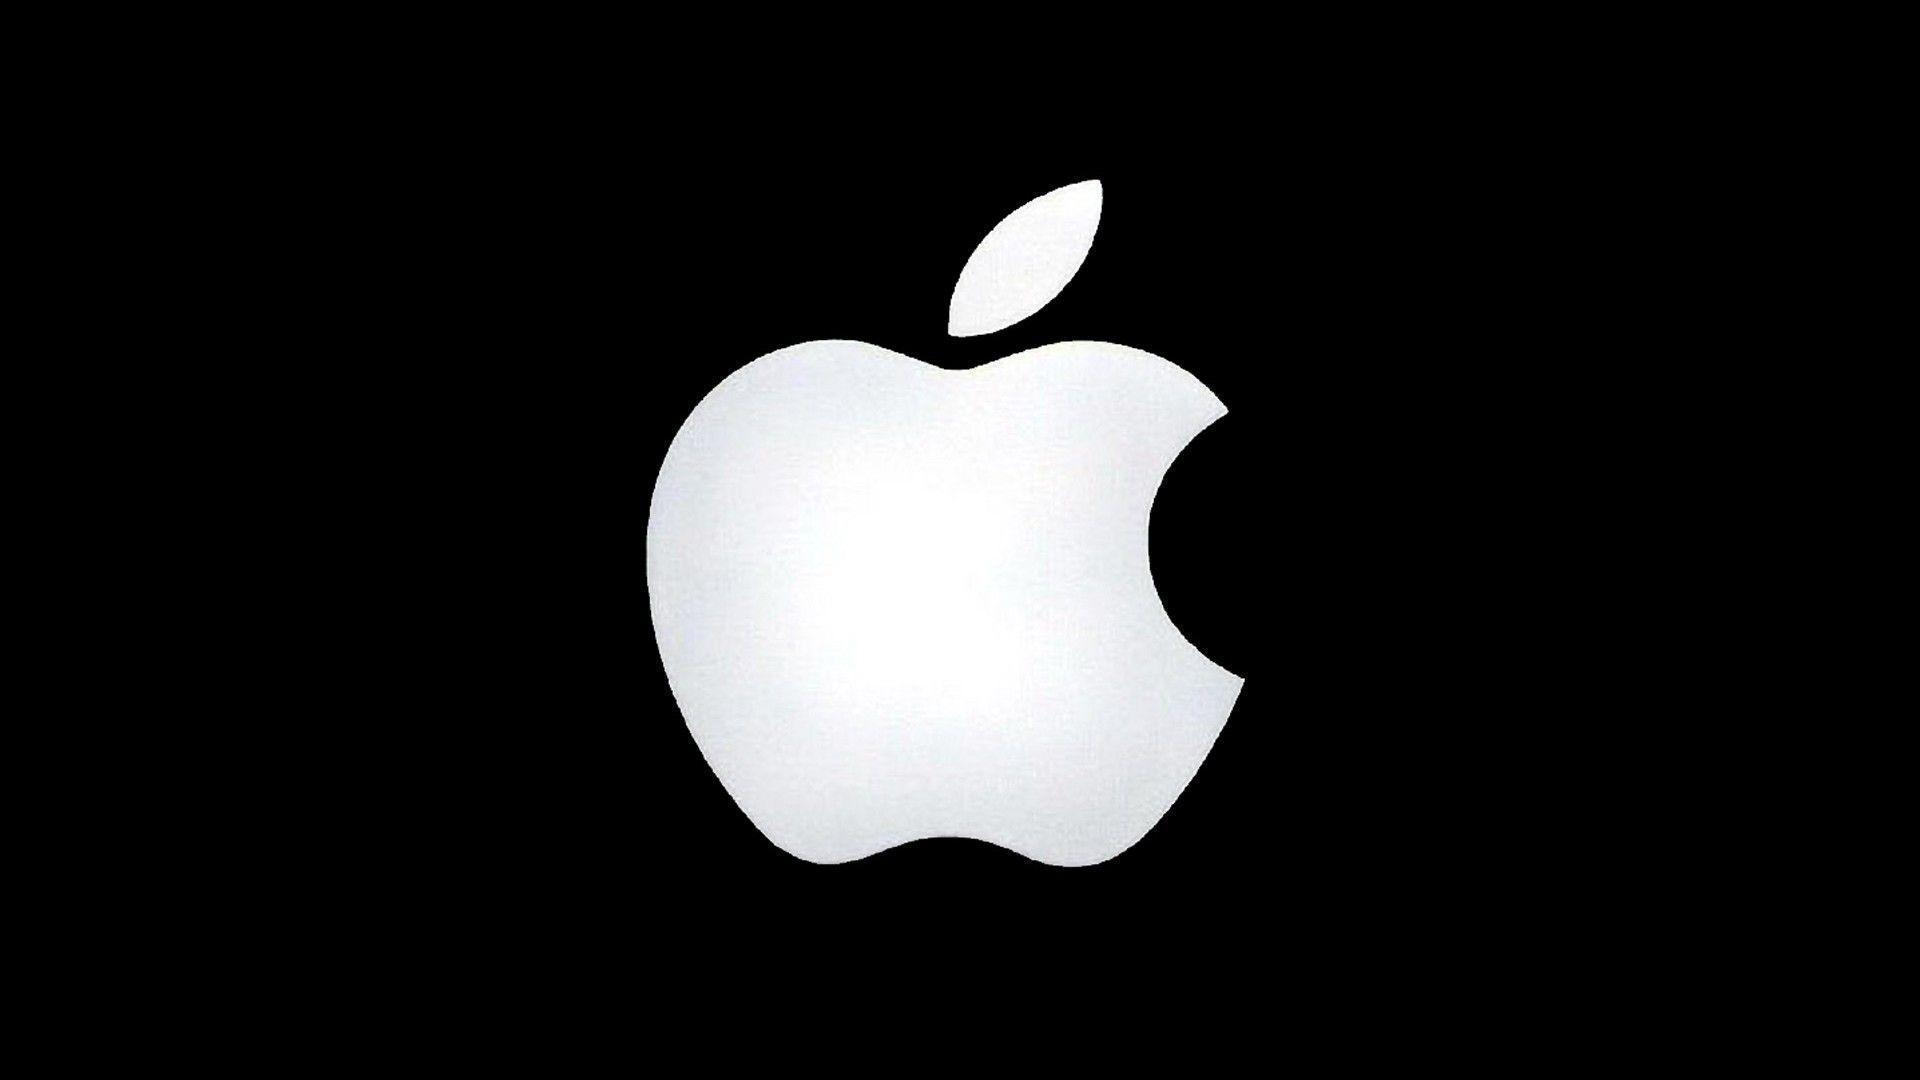 Download 1600x900 Apple Logo Picture Black And White Background